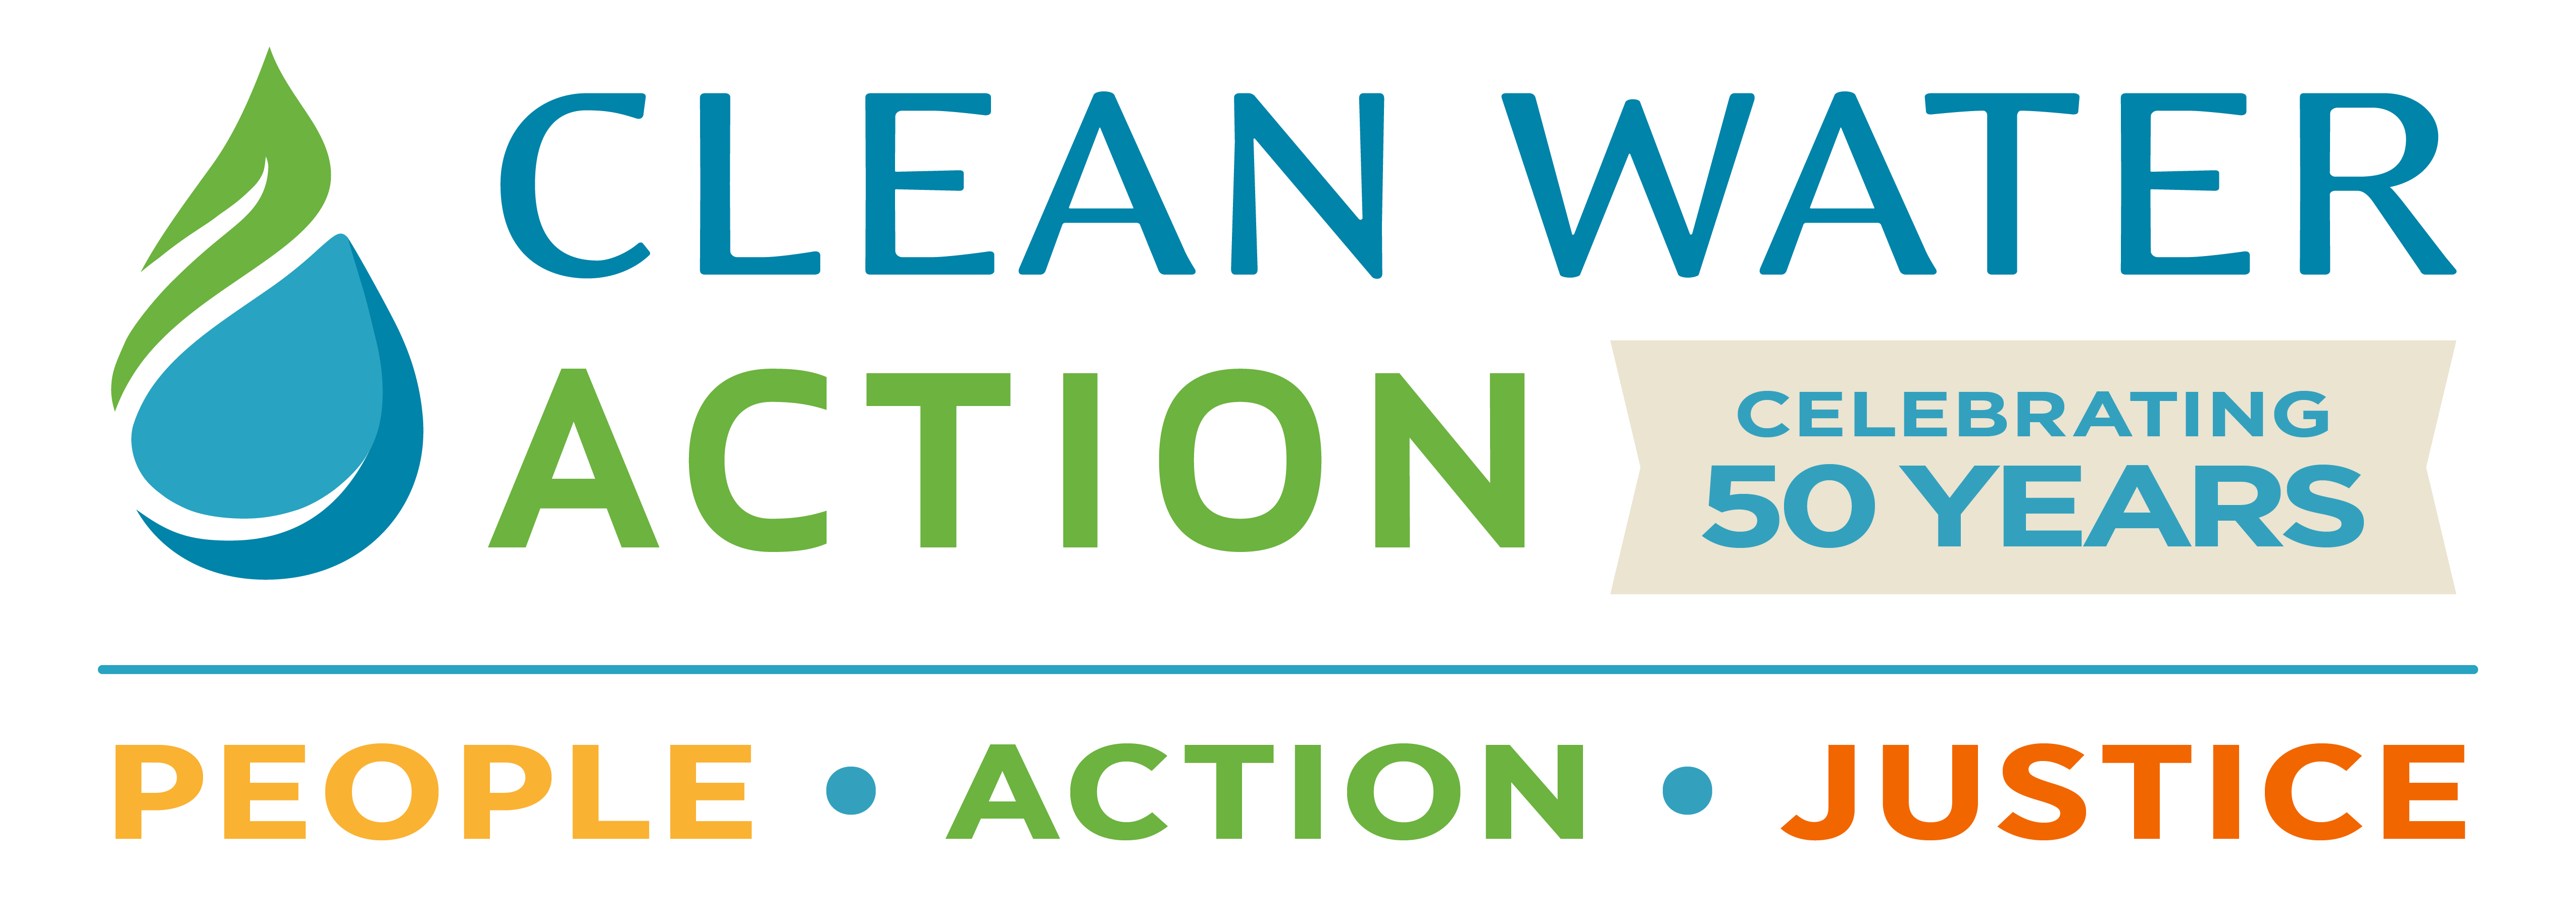 Urge Your Member Of Congress To Fix The Clean Water Act 7107